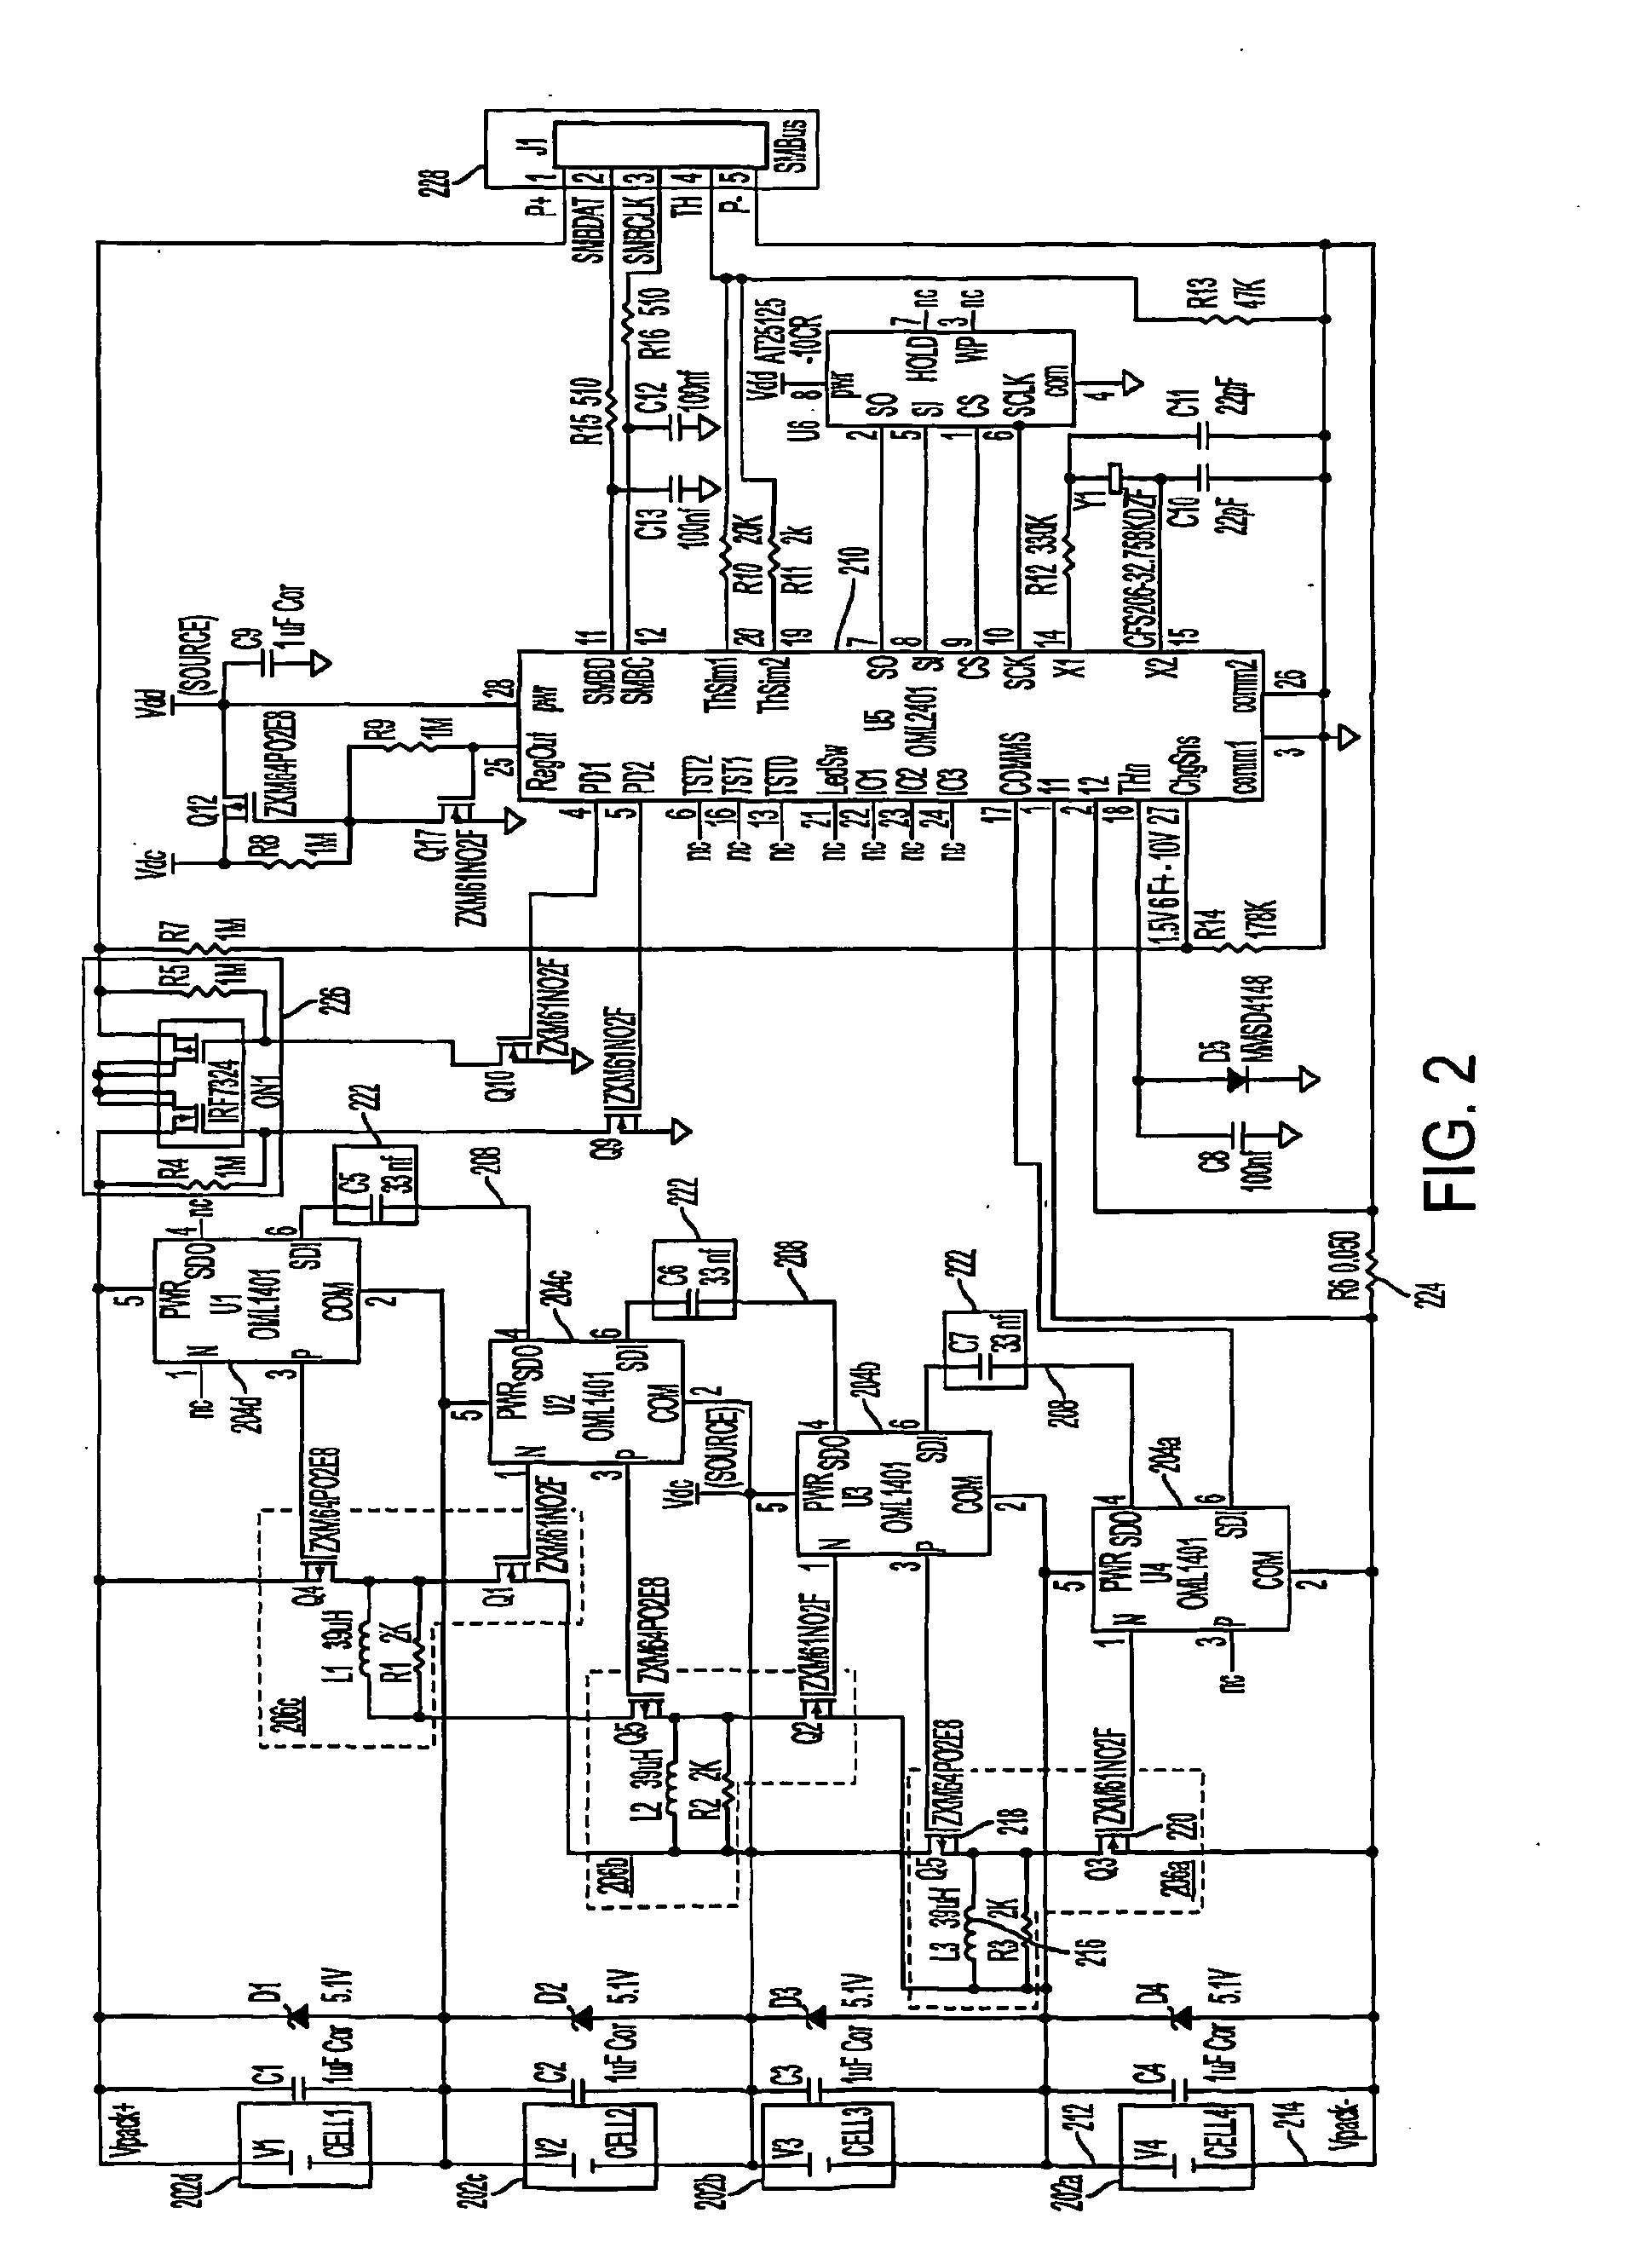 Method and apparatus for managing energy in plural energy storage units